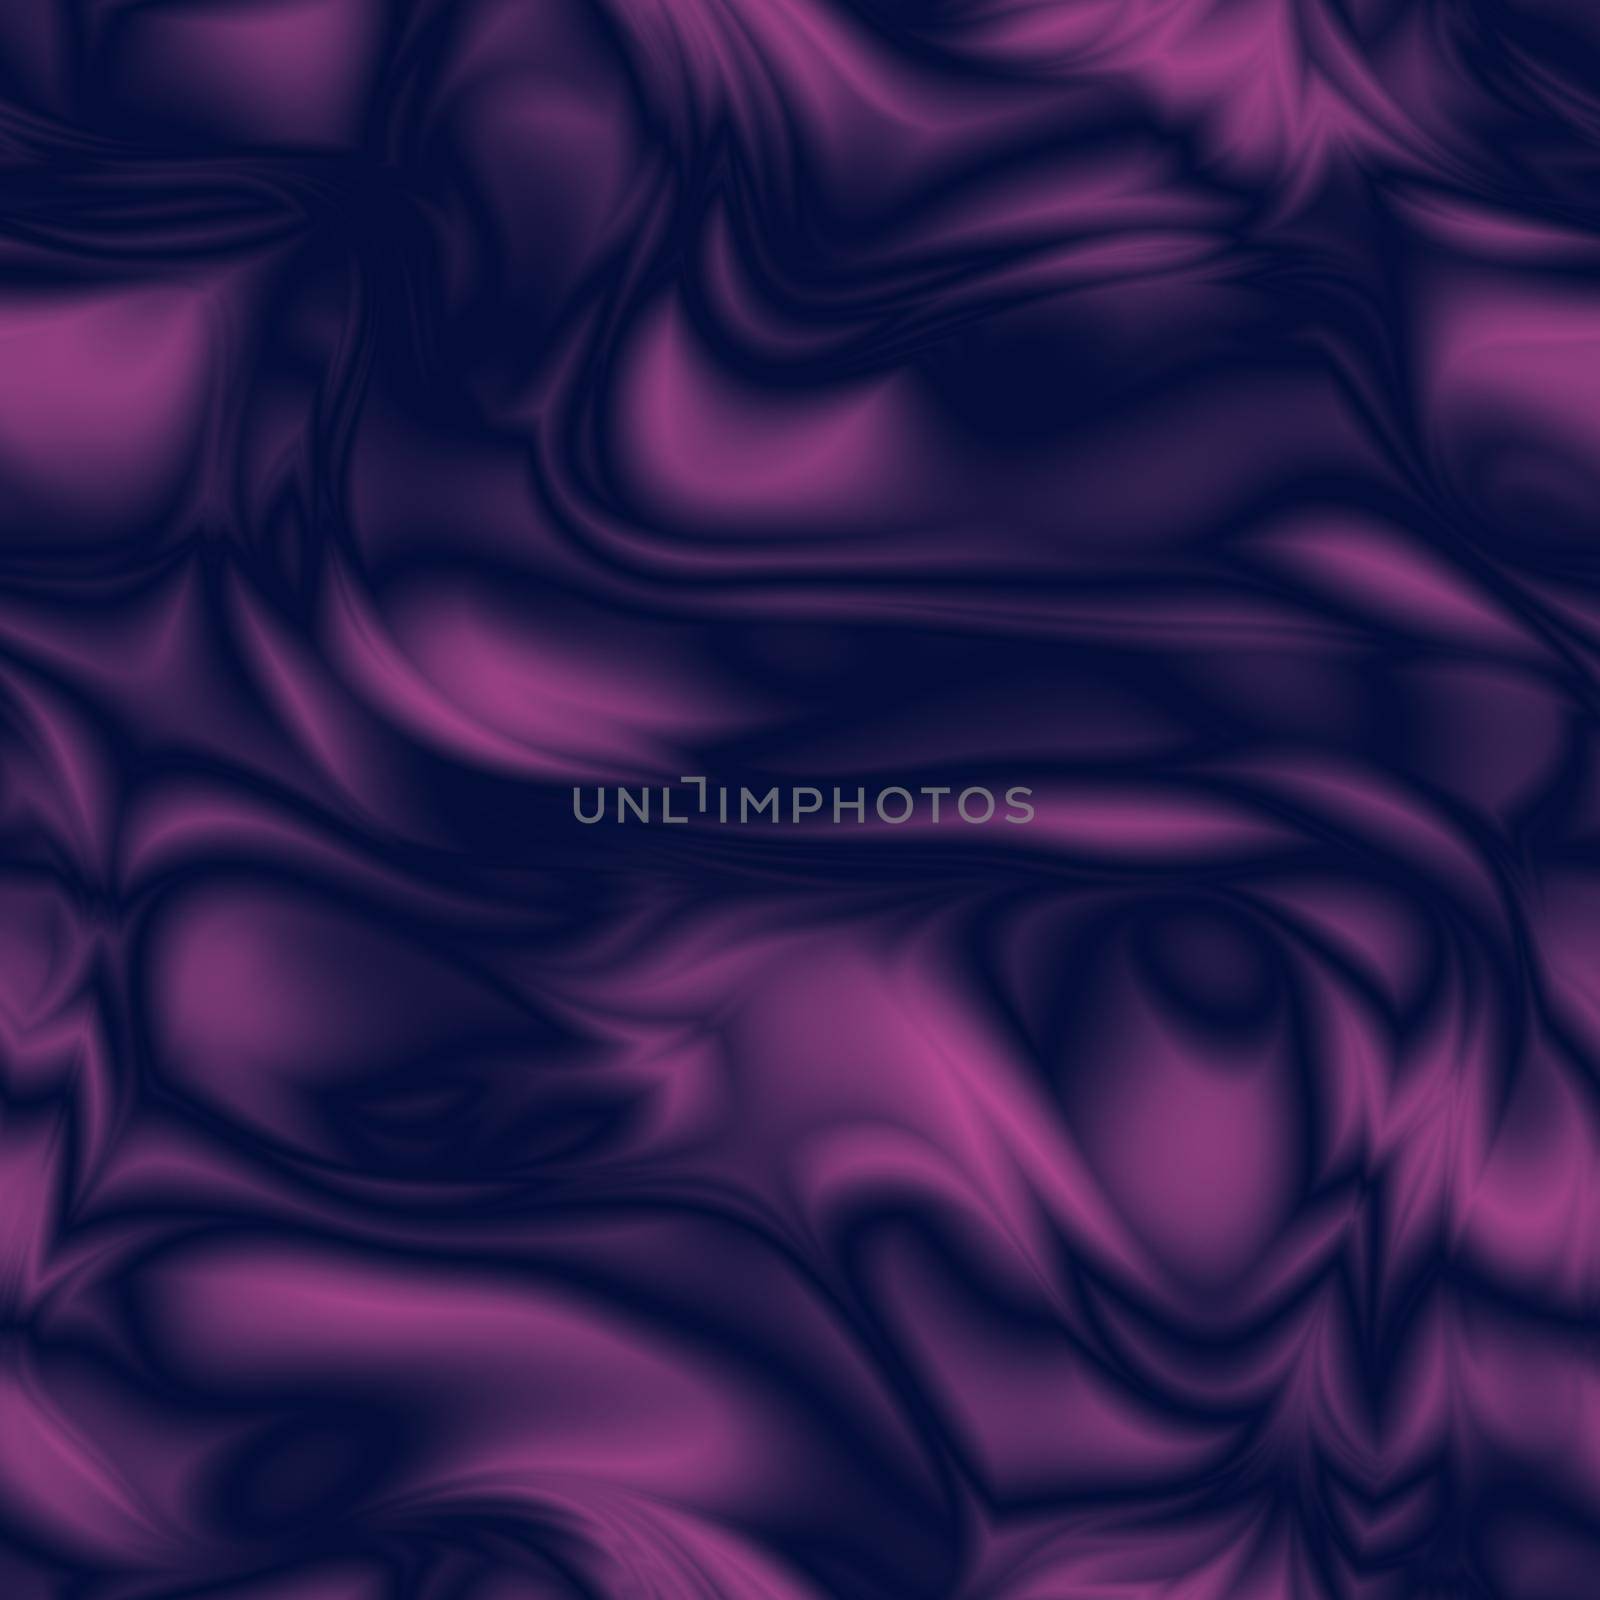 Futuristic psychedelic liquid flowing passion seamless background by kisika